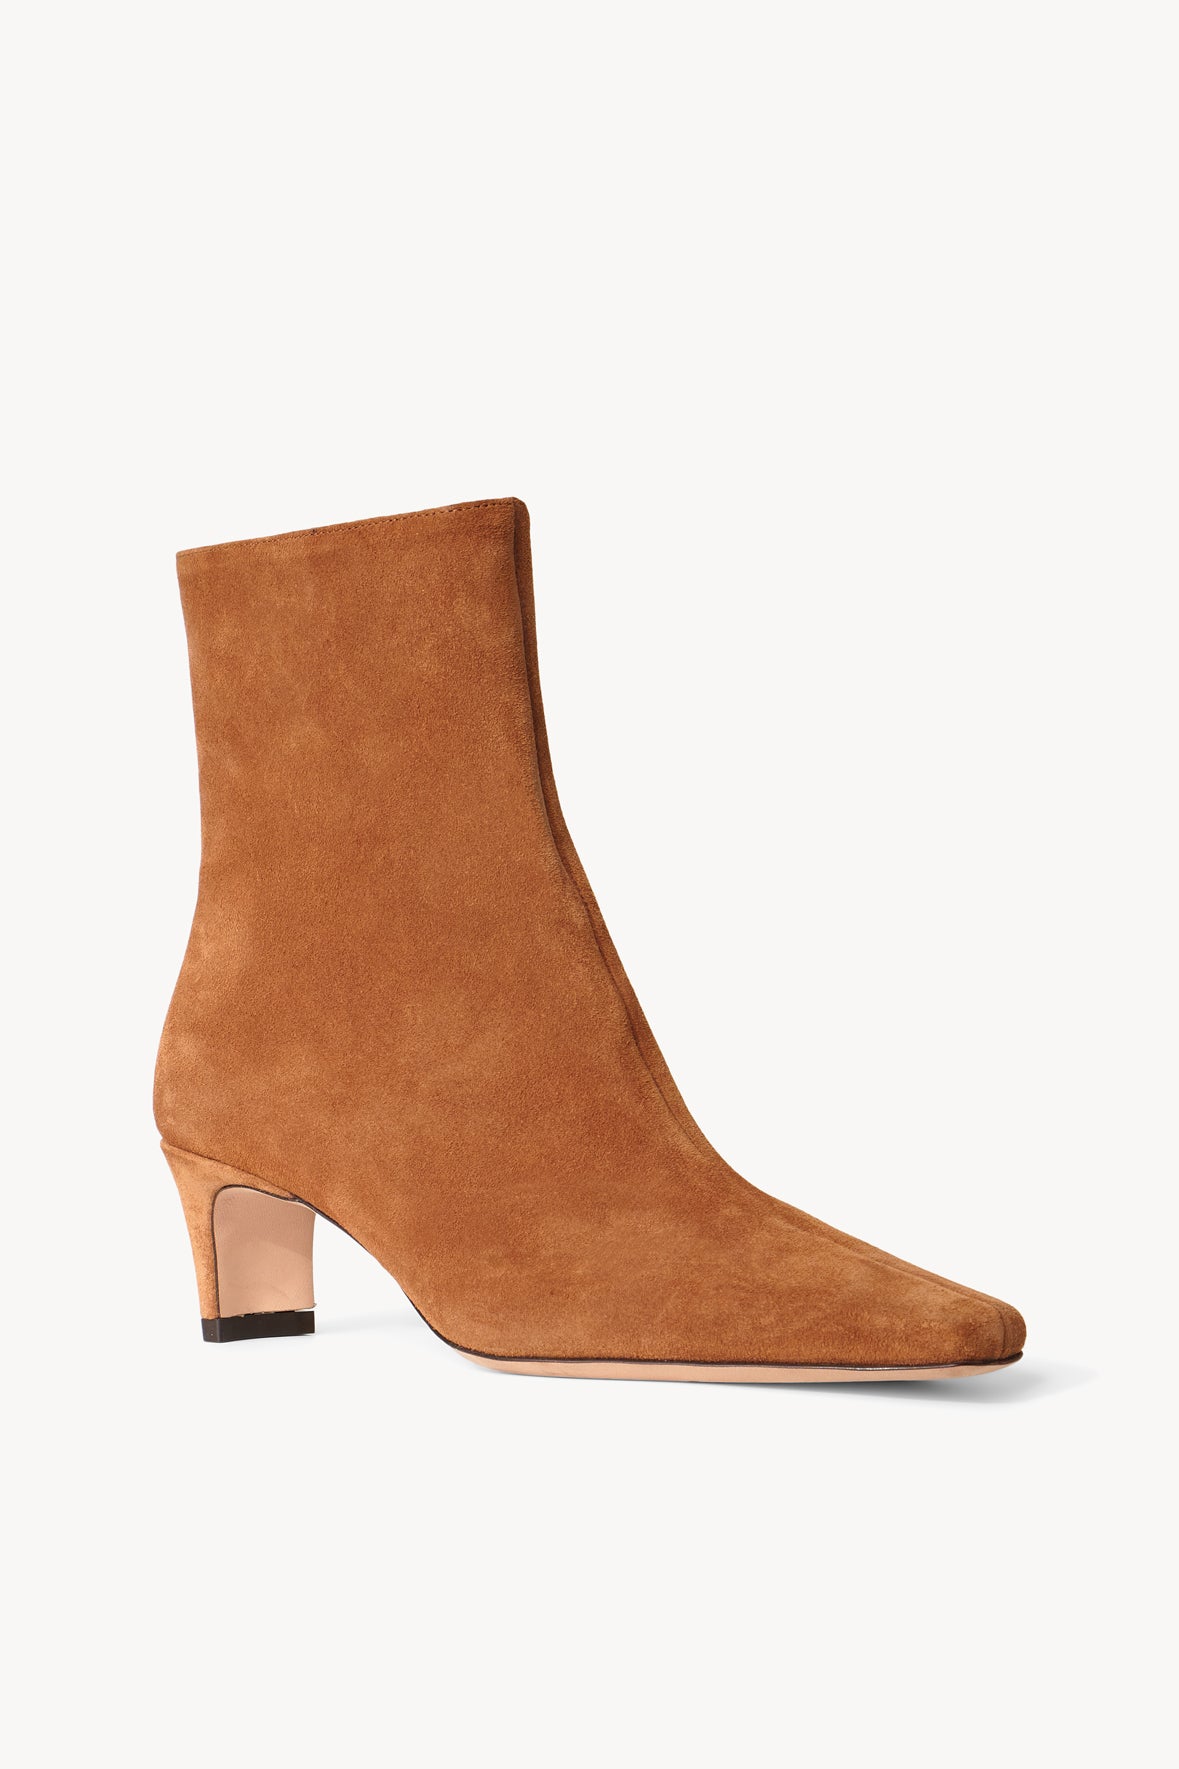 STAUD WALLY ANKLE BOOT TAN SUEDE